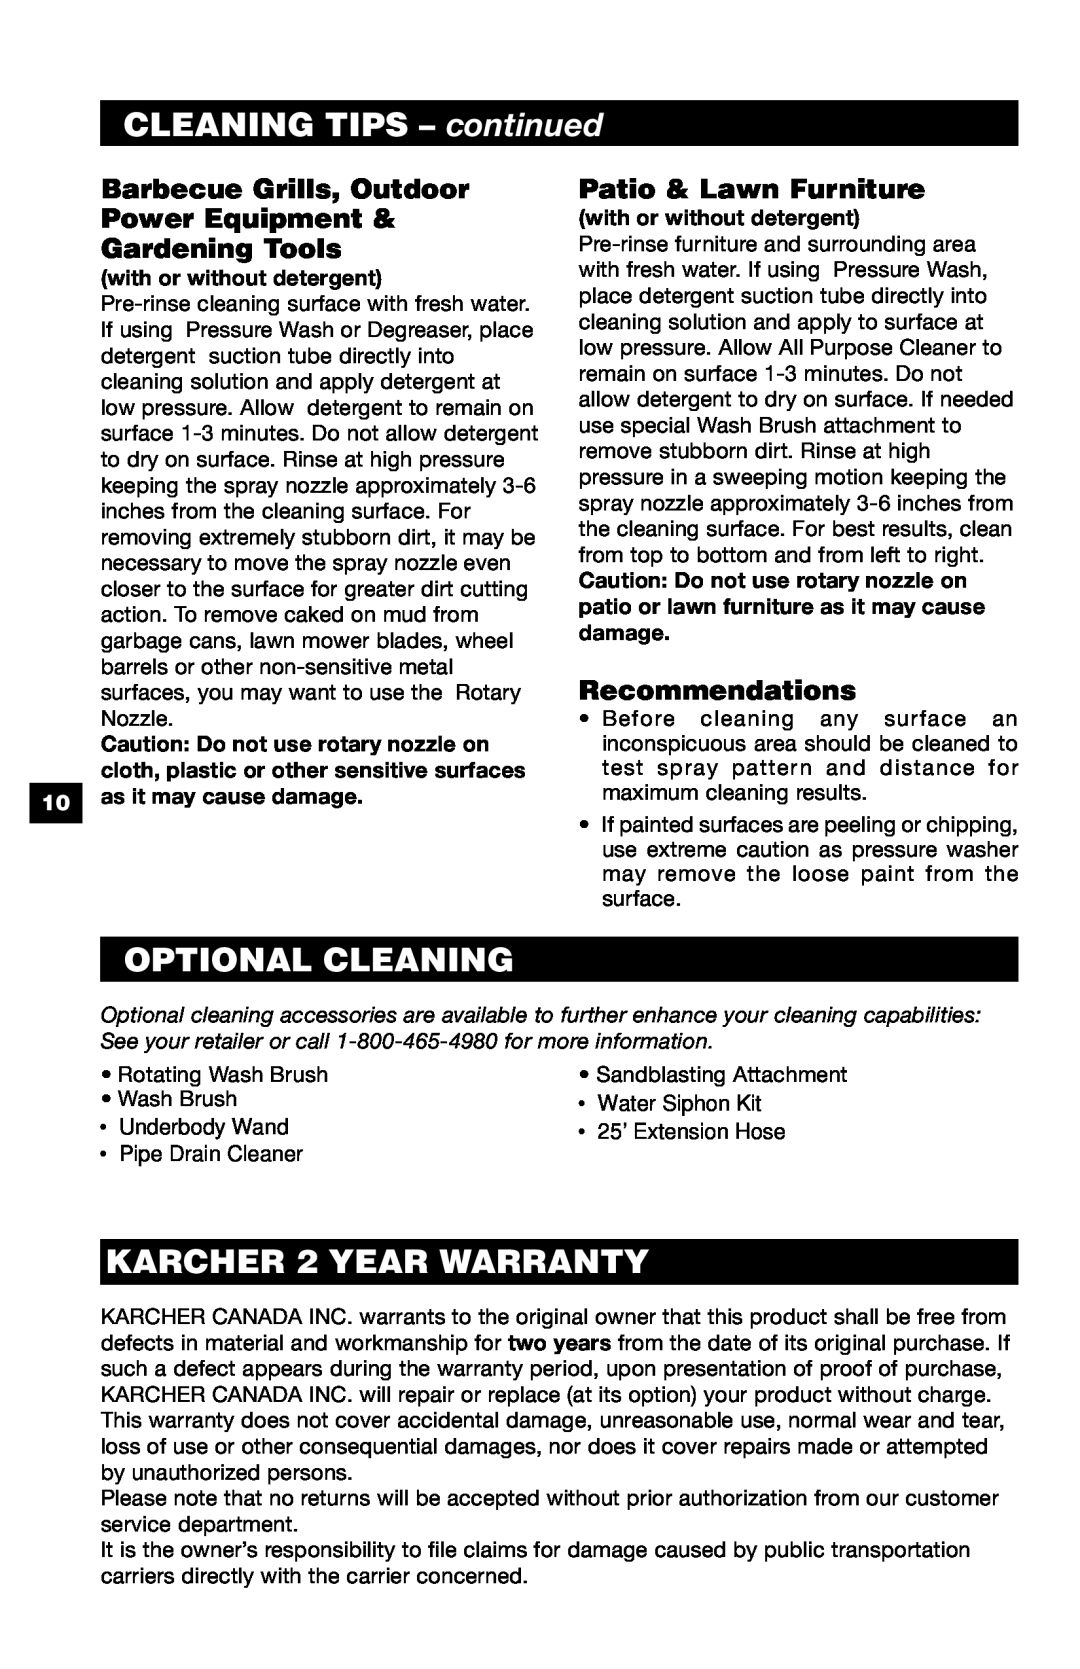 Karcher K 390 M CLEANING TIPS - continued, Optional Cleaning, KARCHER 2 YEAR WARRANTY, Patio & Lawn Furniture 